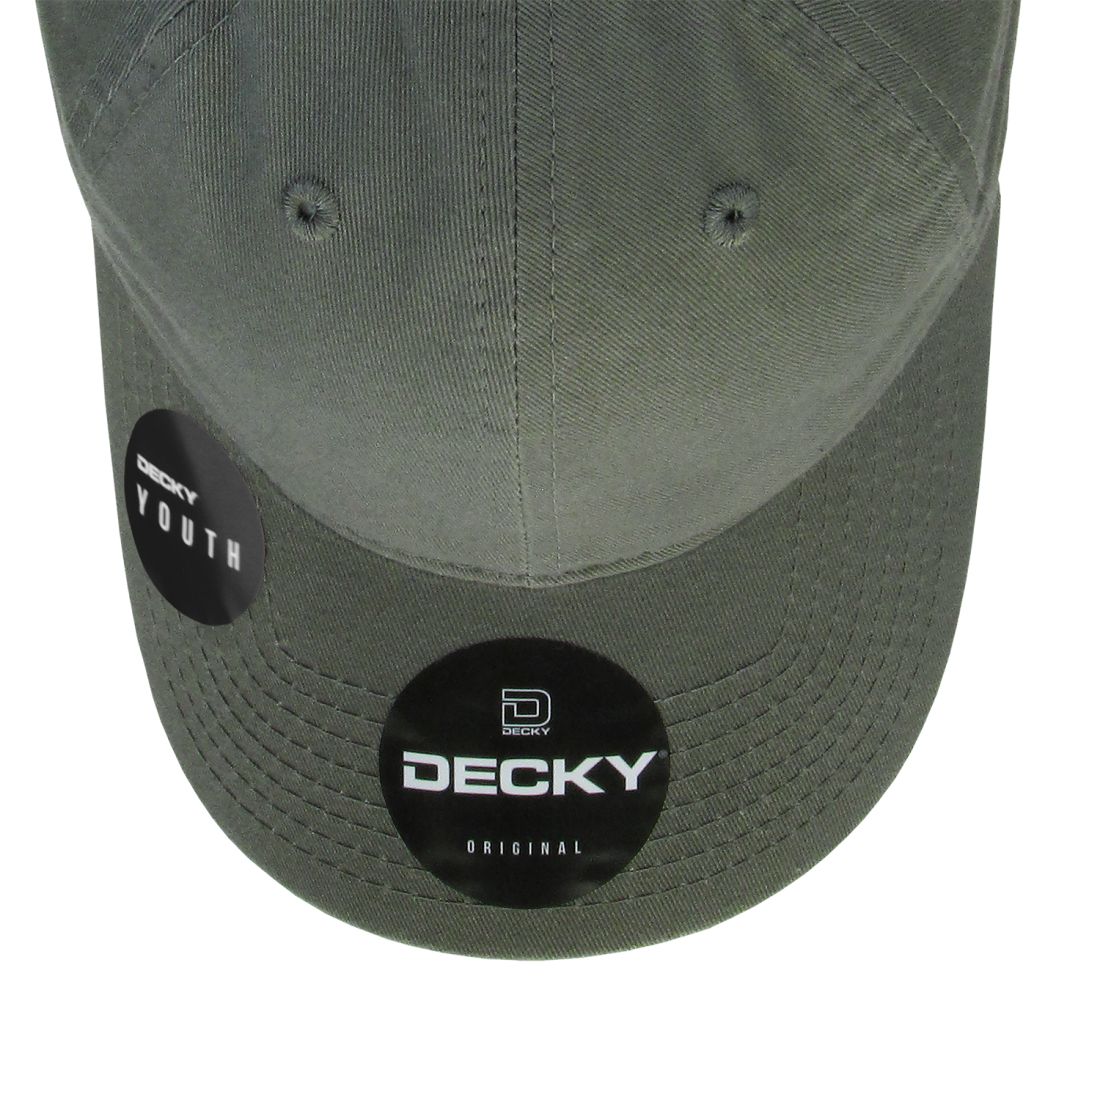 Decky 6111 Pique Pattern Low Crown Hats 7 Panel Curved Bill Performance Caps Wholesale